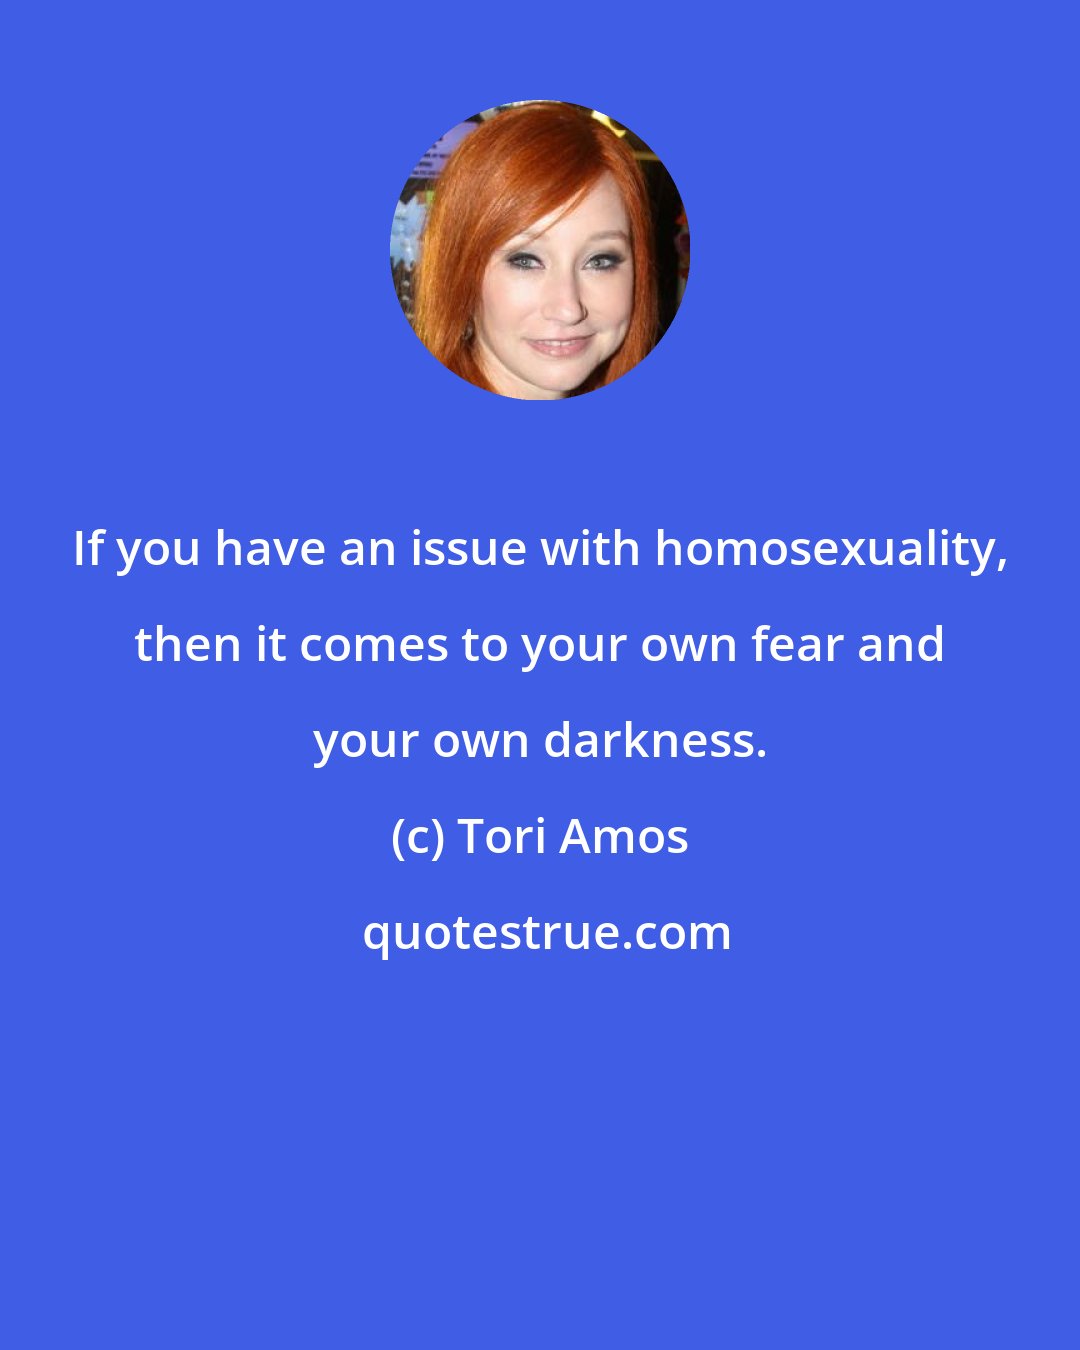 Tori Amos: If you have an issue with homosexuality, then it comes to your own fear and your own darkness.